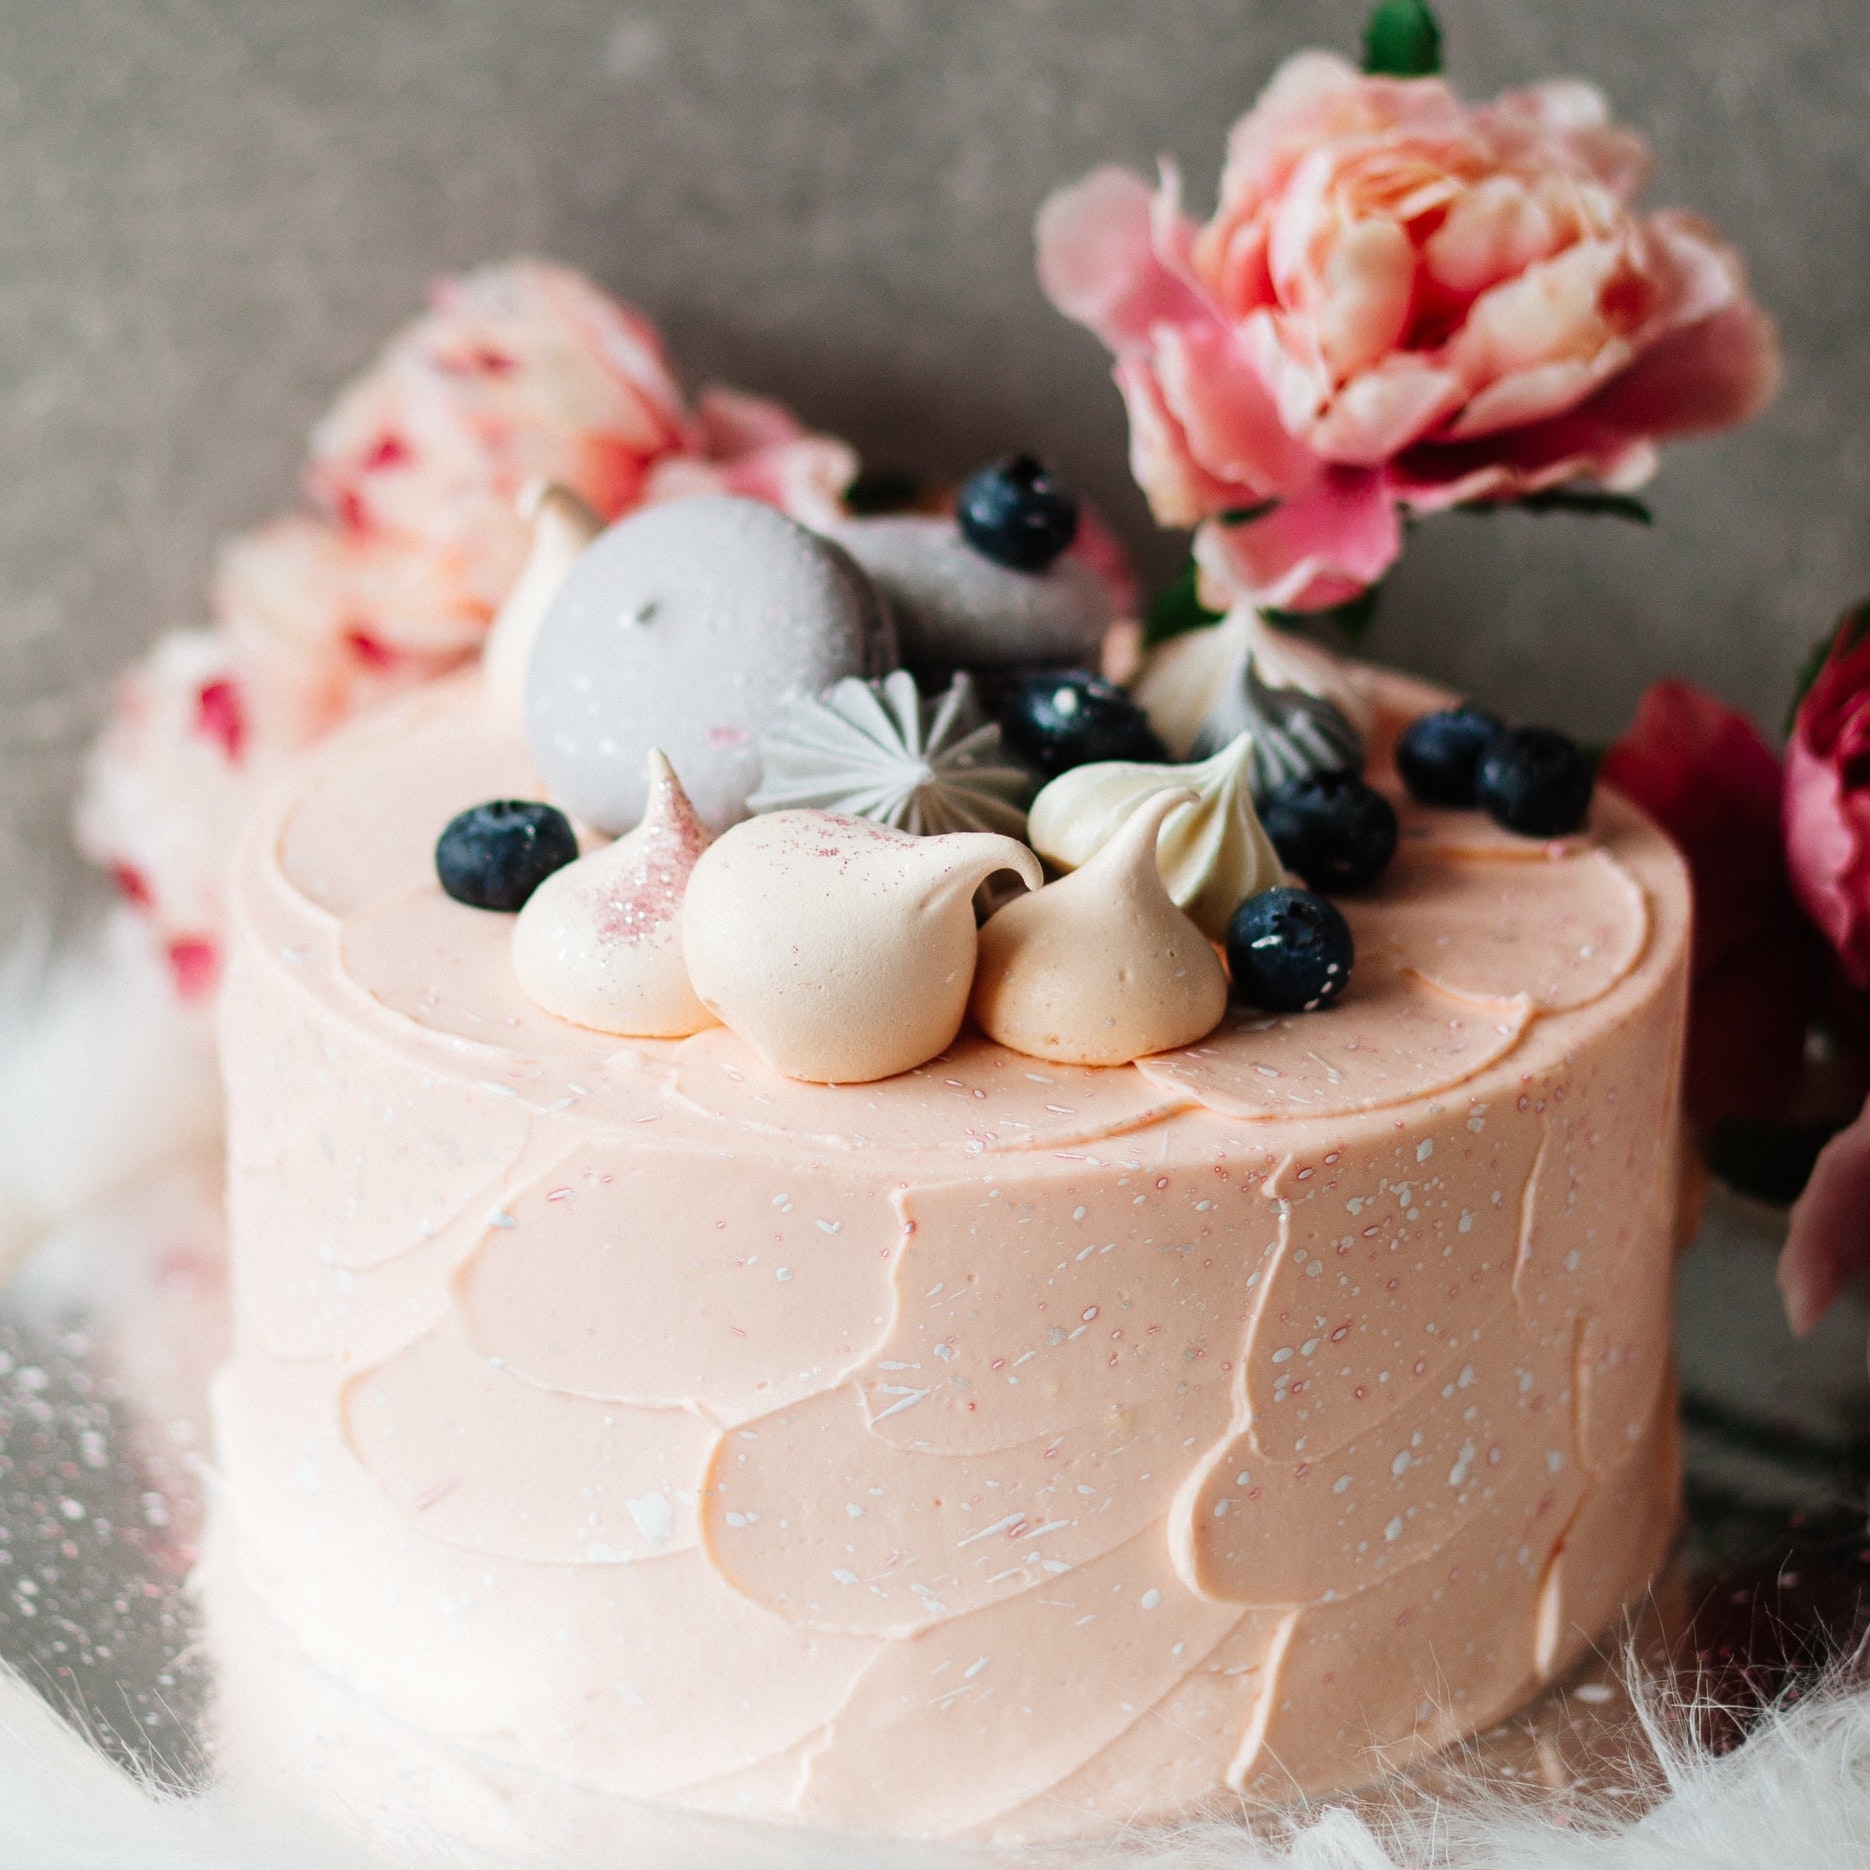 image of birthday cake and flowers